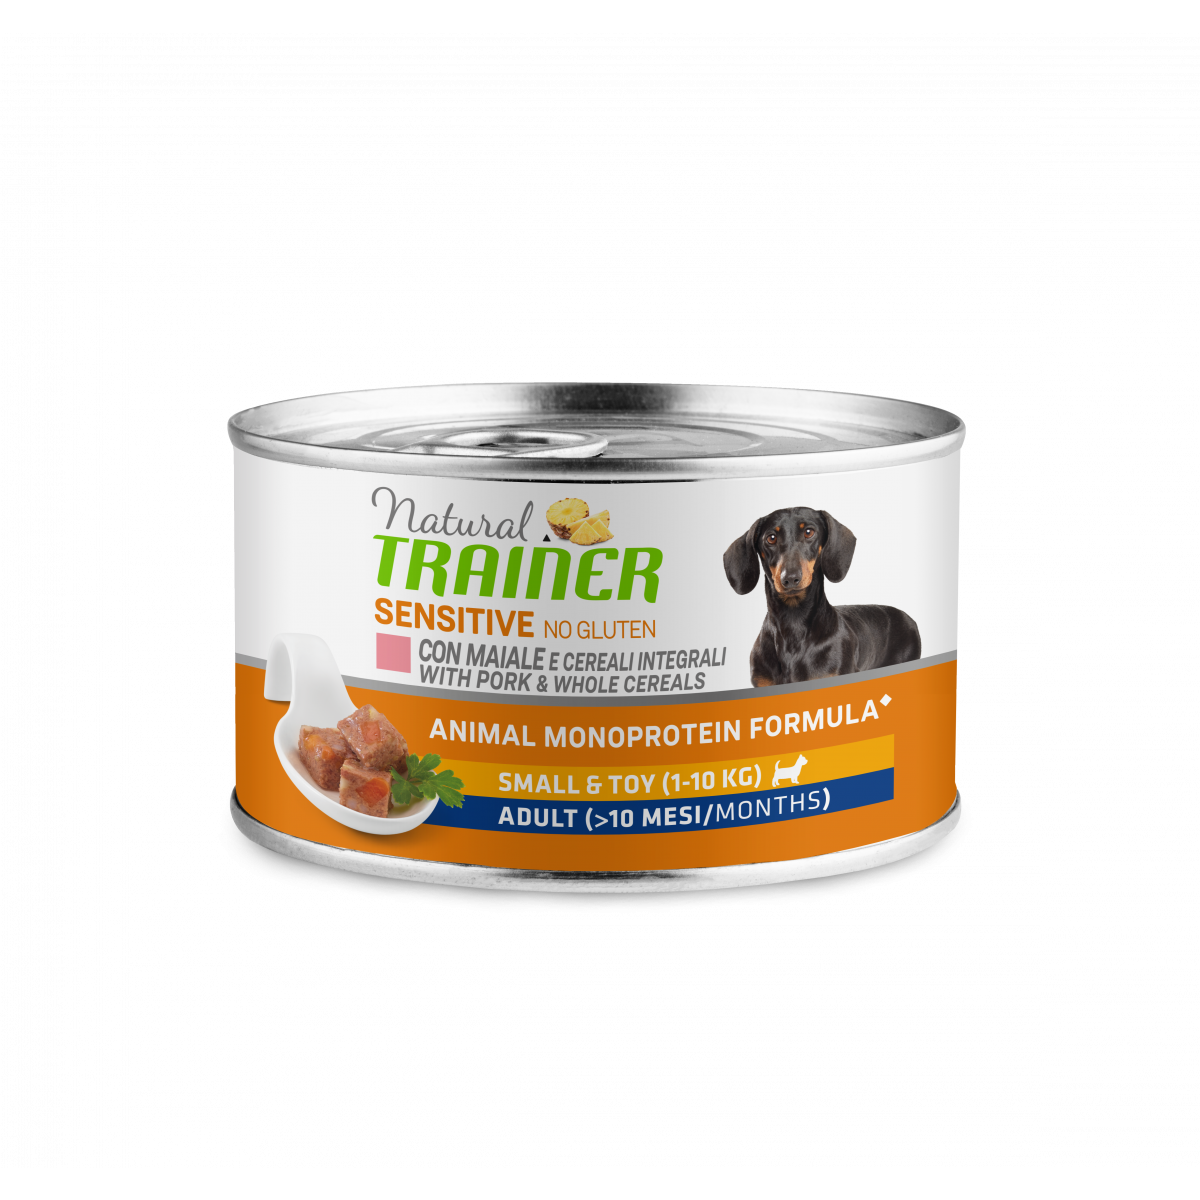 Natural Trainer Sensitive NO GLUTEN  Adult Small   Maiale & Cereali 150gr